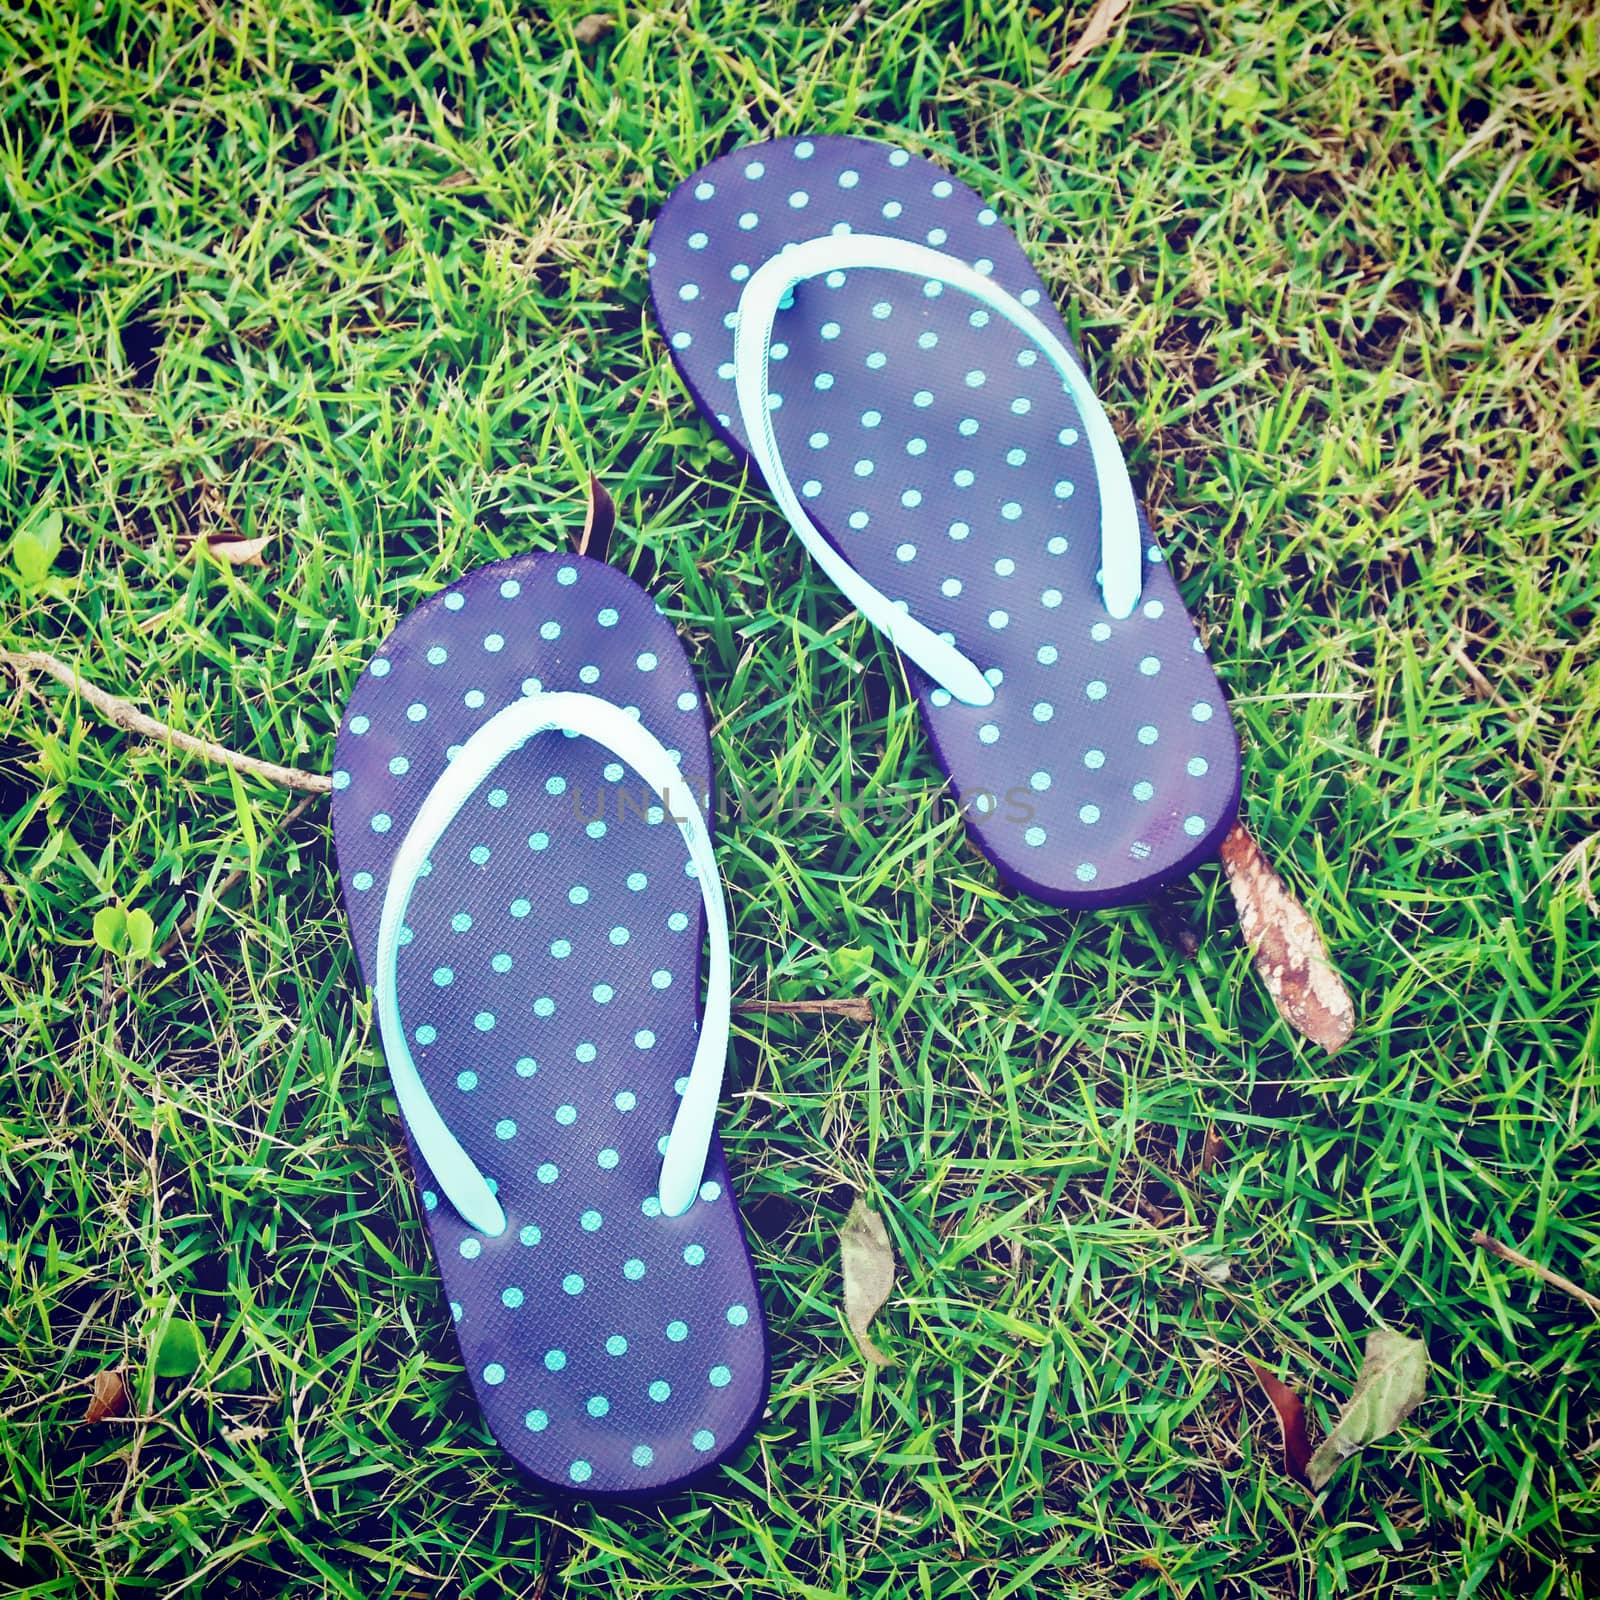 blue polka dot sandal on grass with retro filter effect